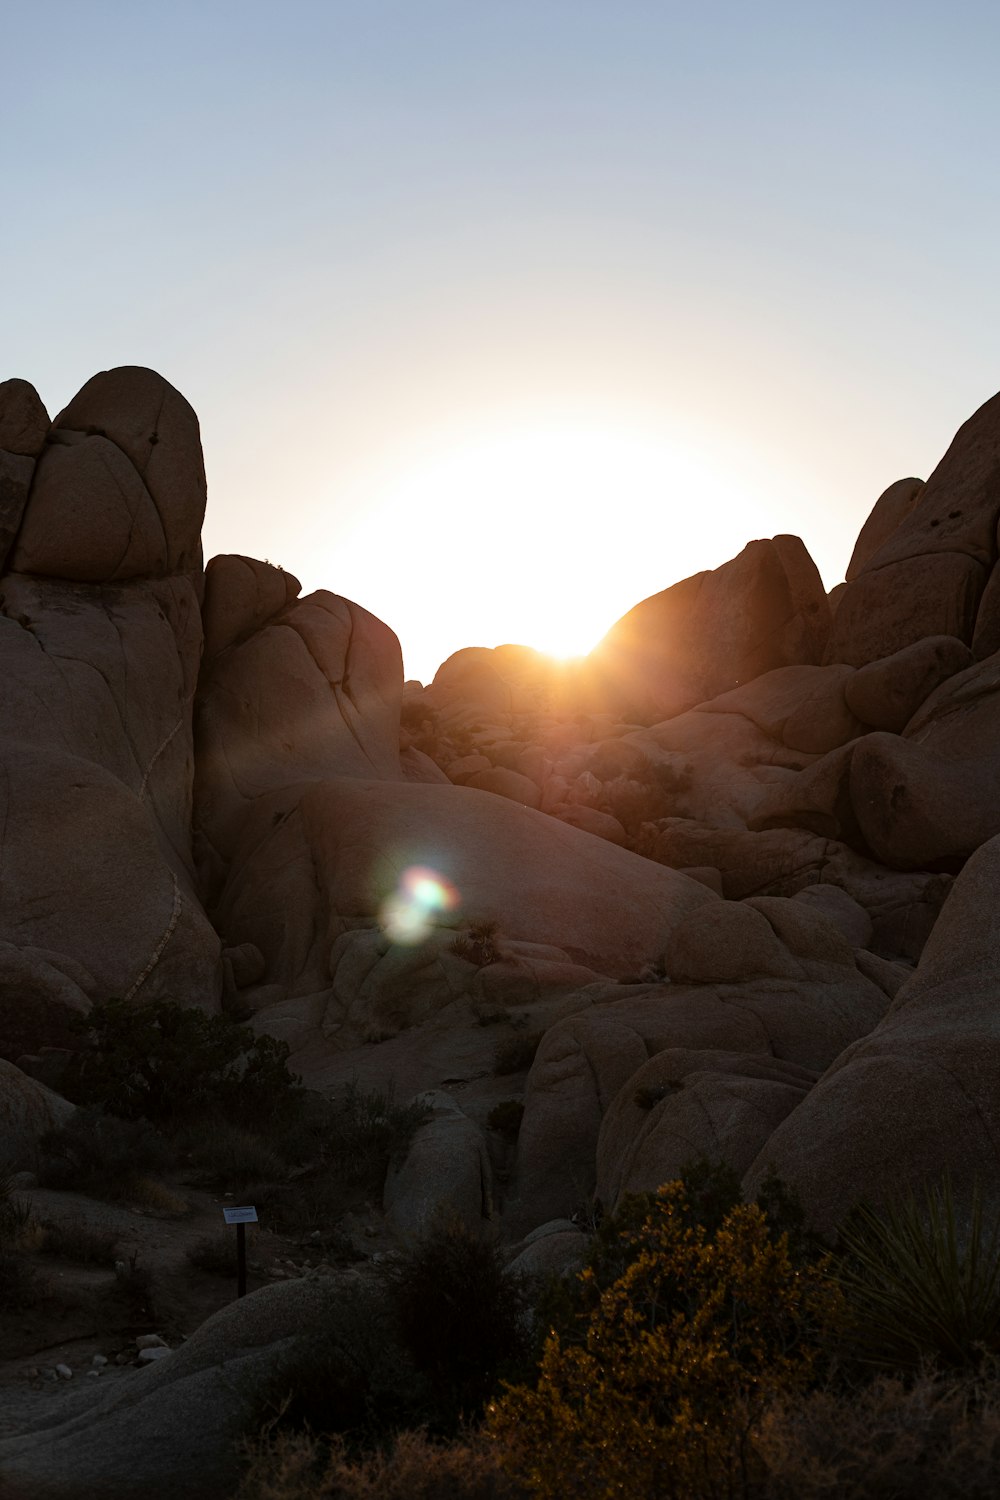 the sun is setting over the rocks in the desert